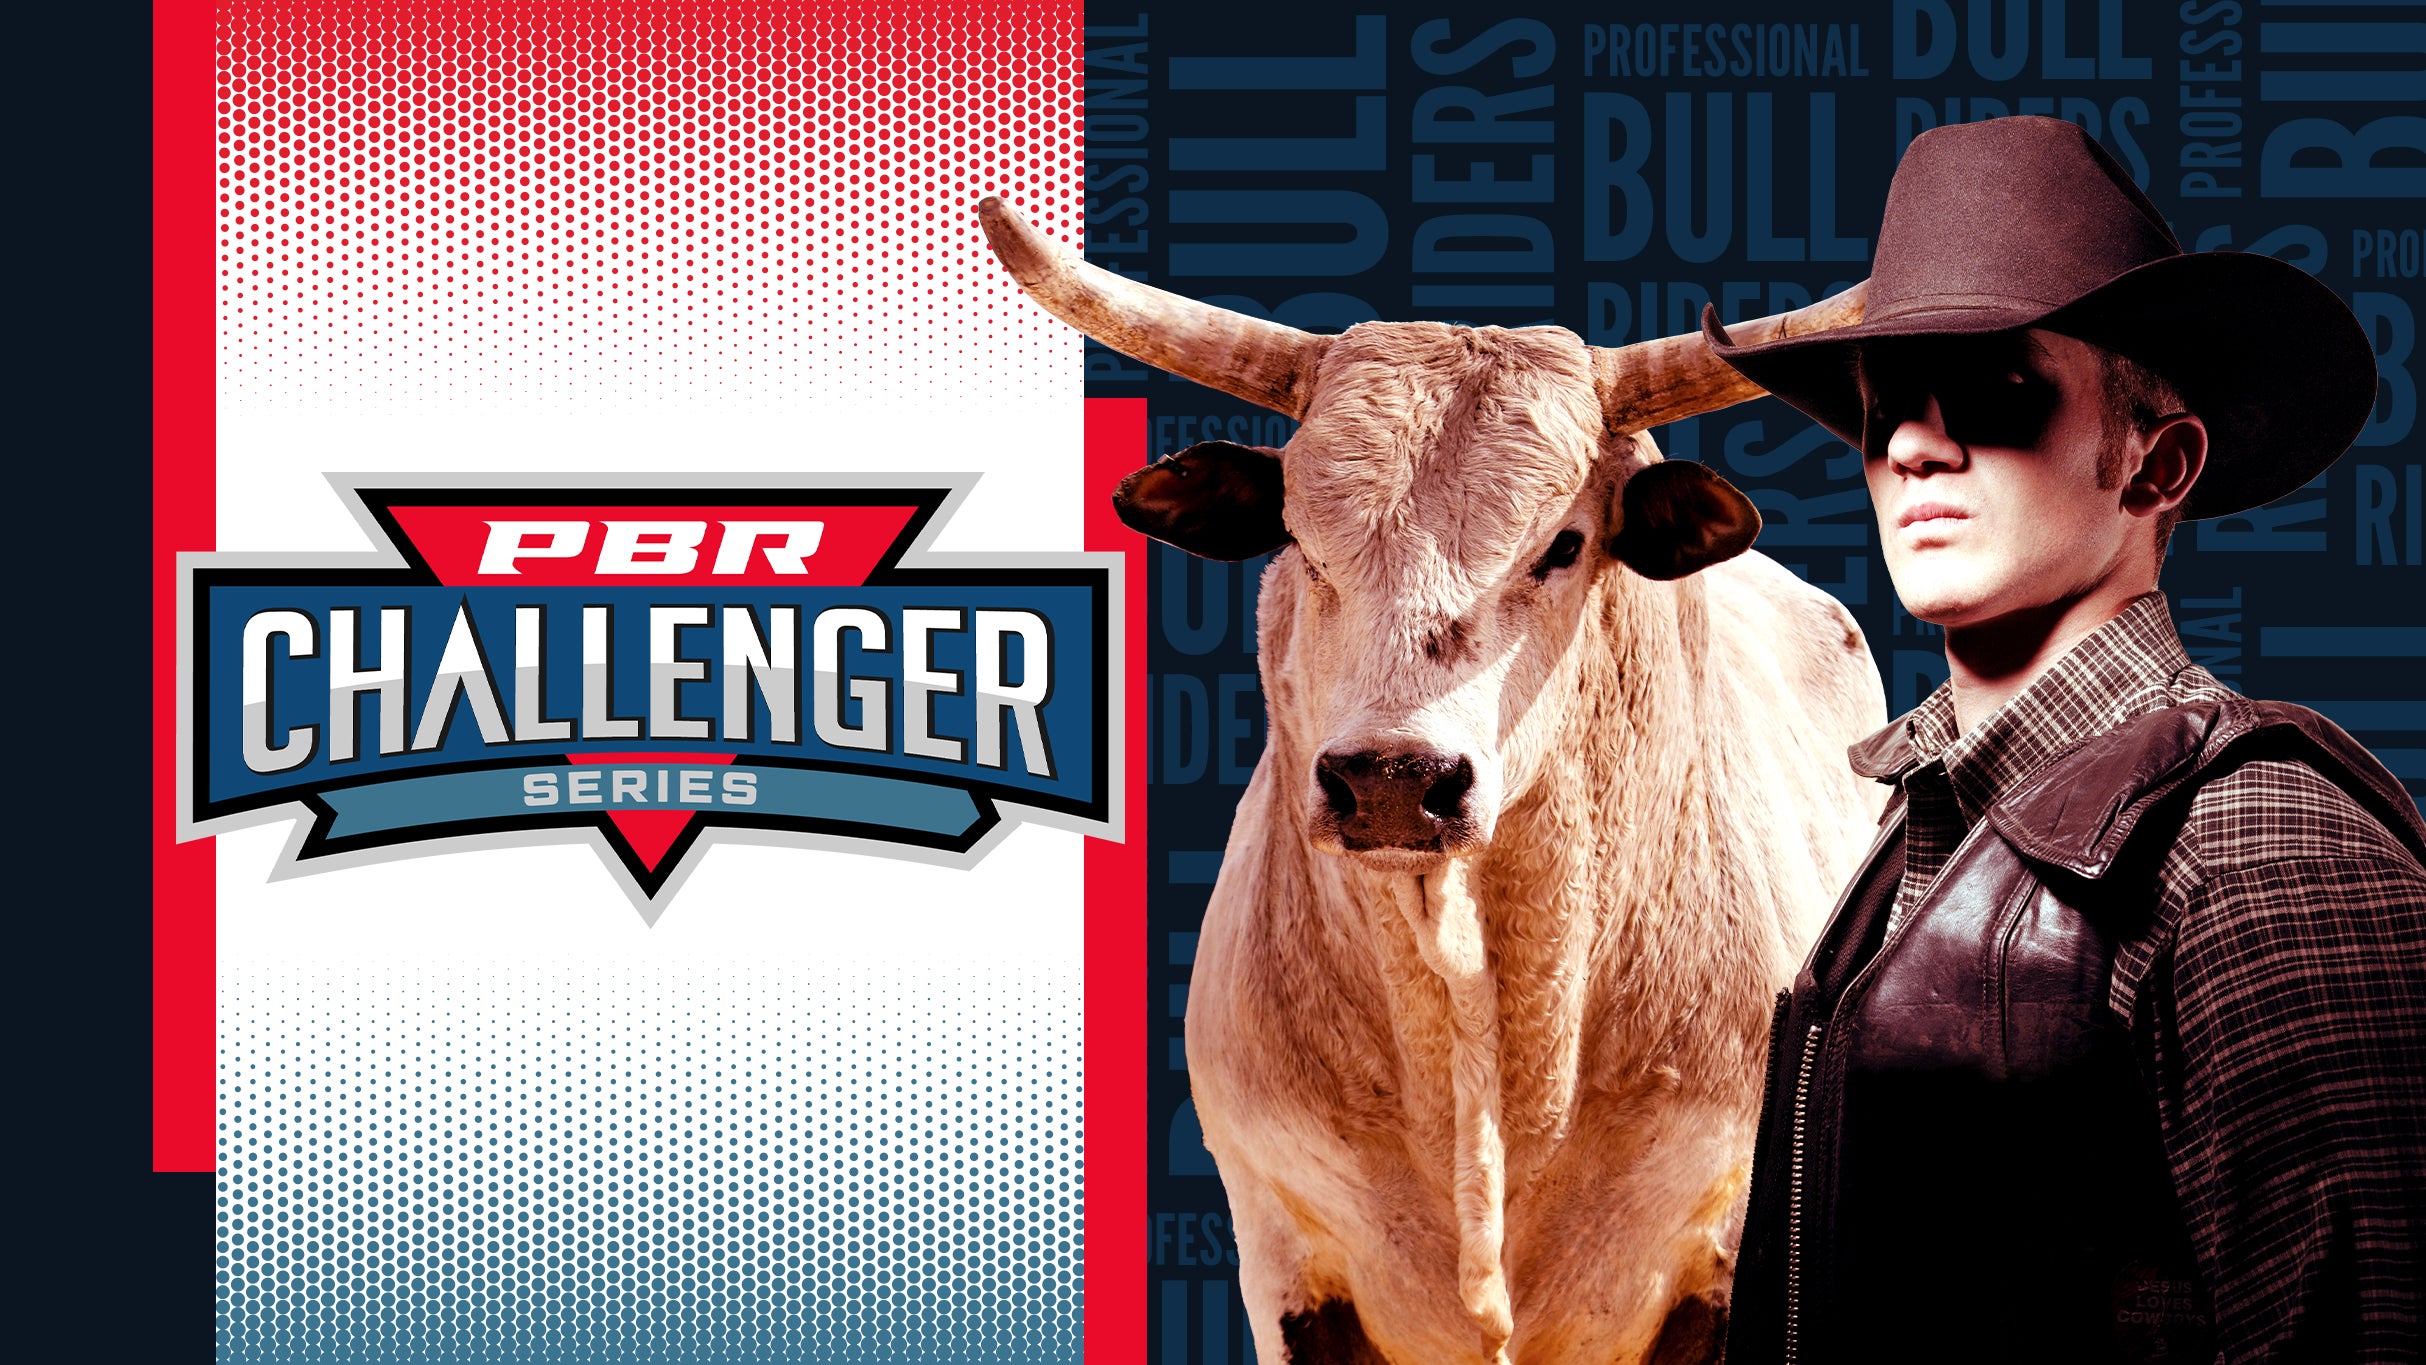 working presale code to PBR: Challenger Series face value tickets in Rochester